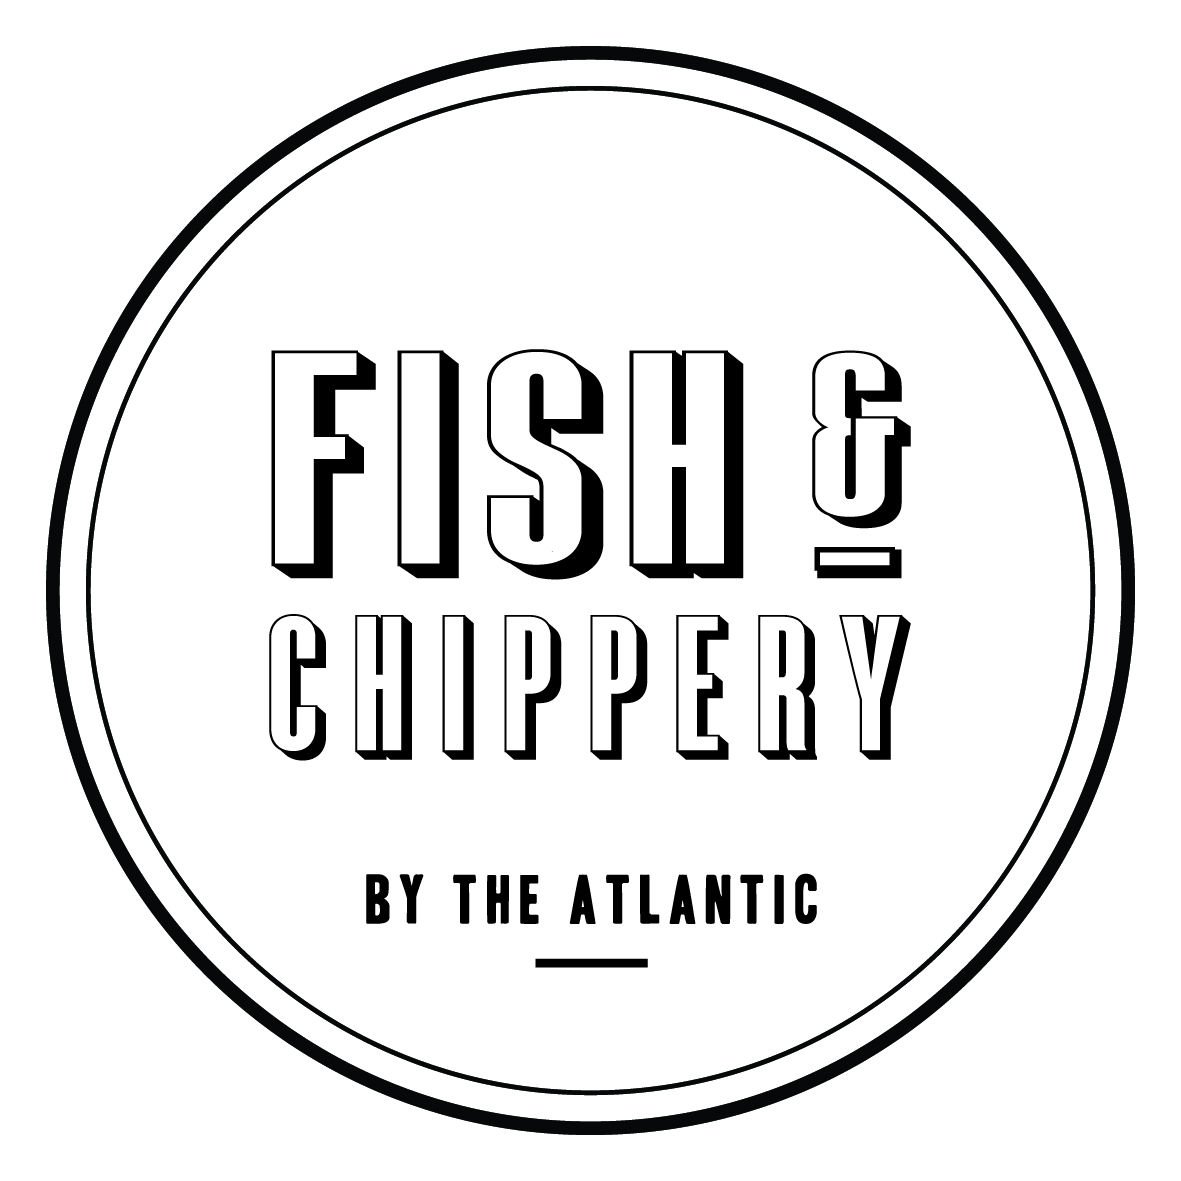 Logo of Fish & Chippery by The Atlantic